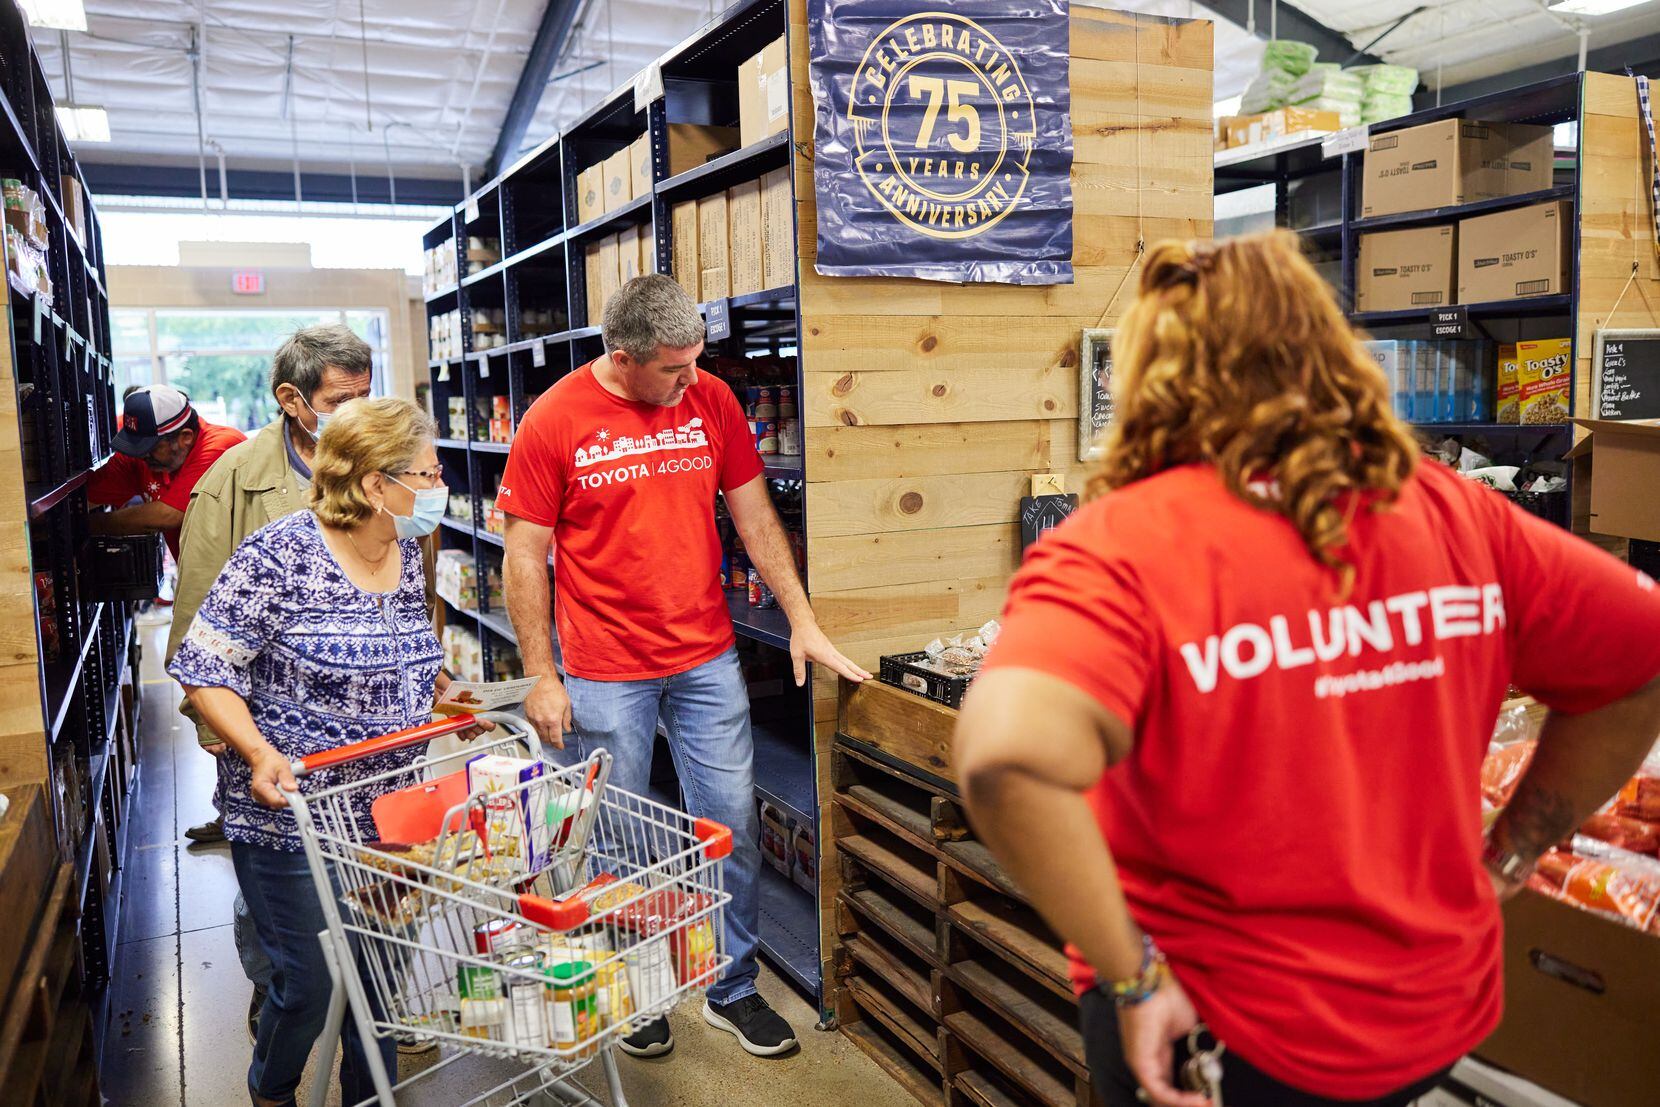 Volunteers in red T-shirts help woman pushing grocery cart through food pantry.